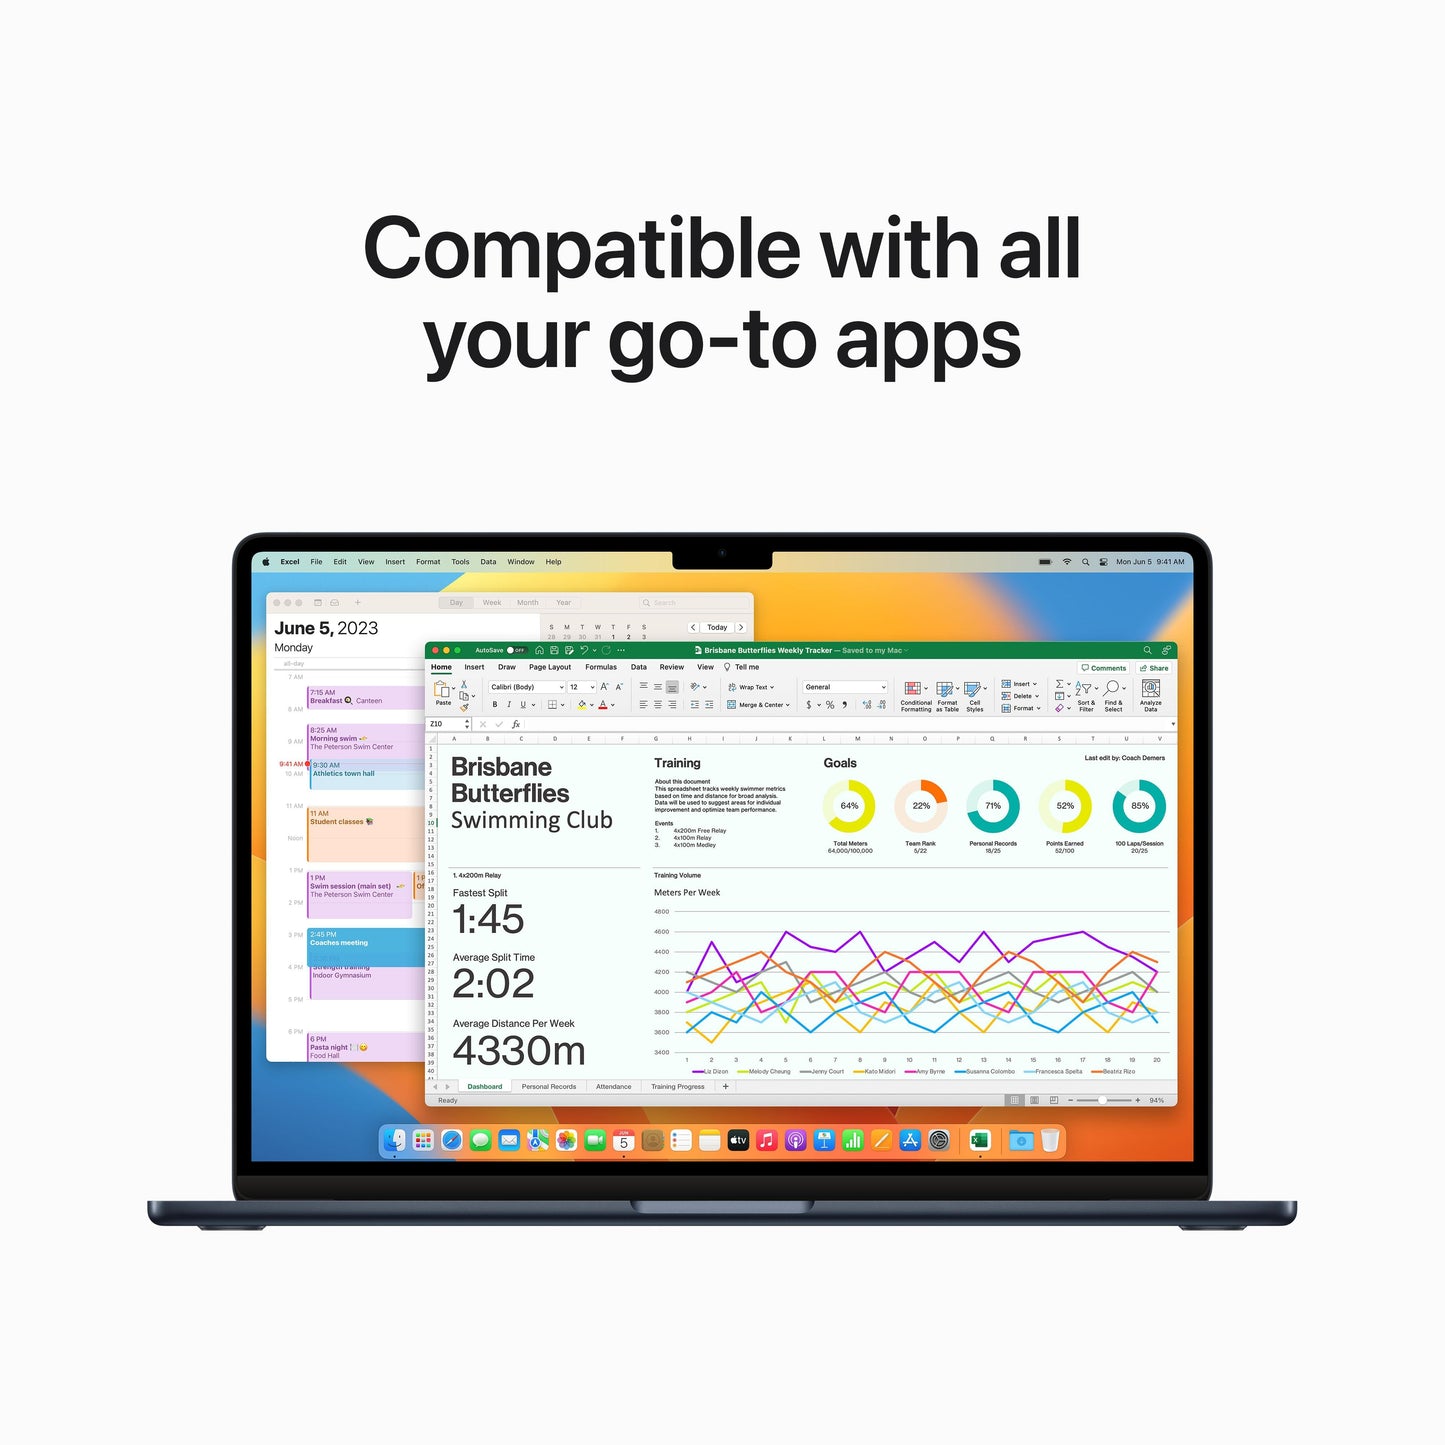 15-inch MacBook Air: Apple M2 chip with 8-core CPU and 10-core GPU, 512GB SSD - Midnight